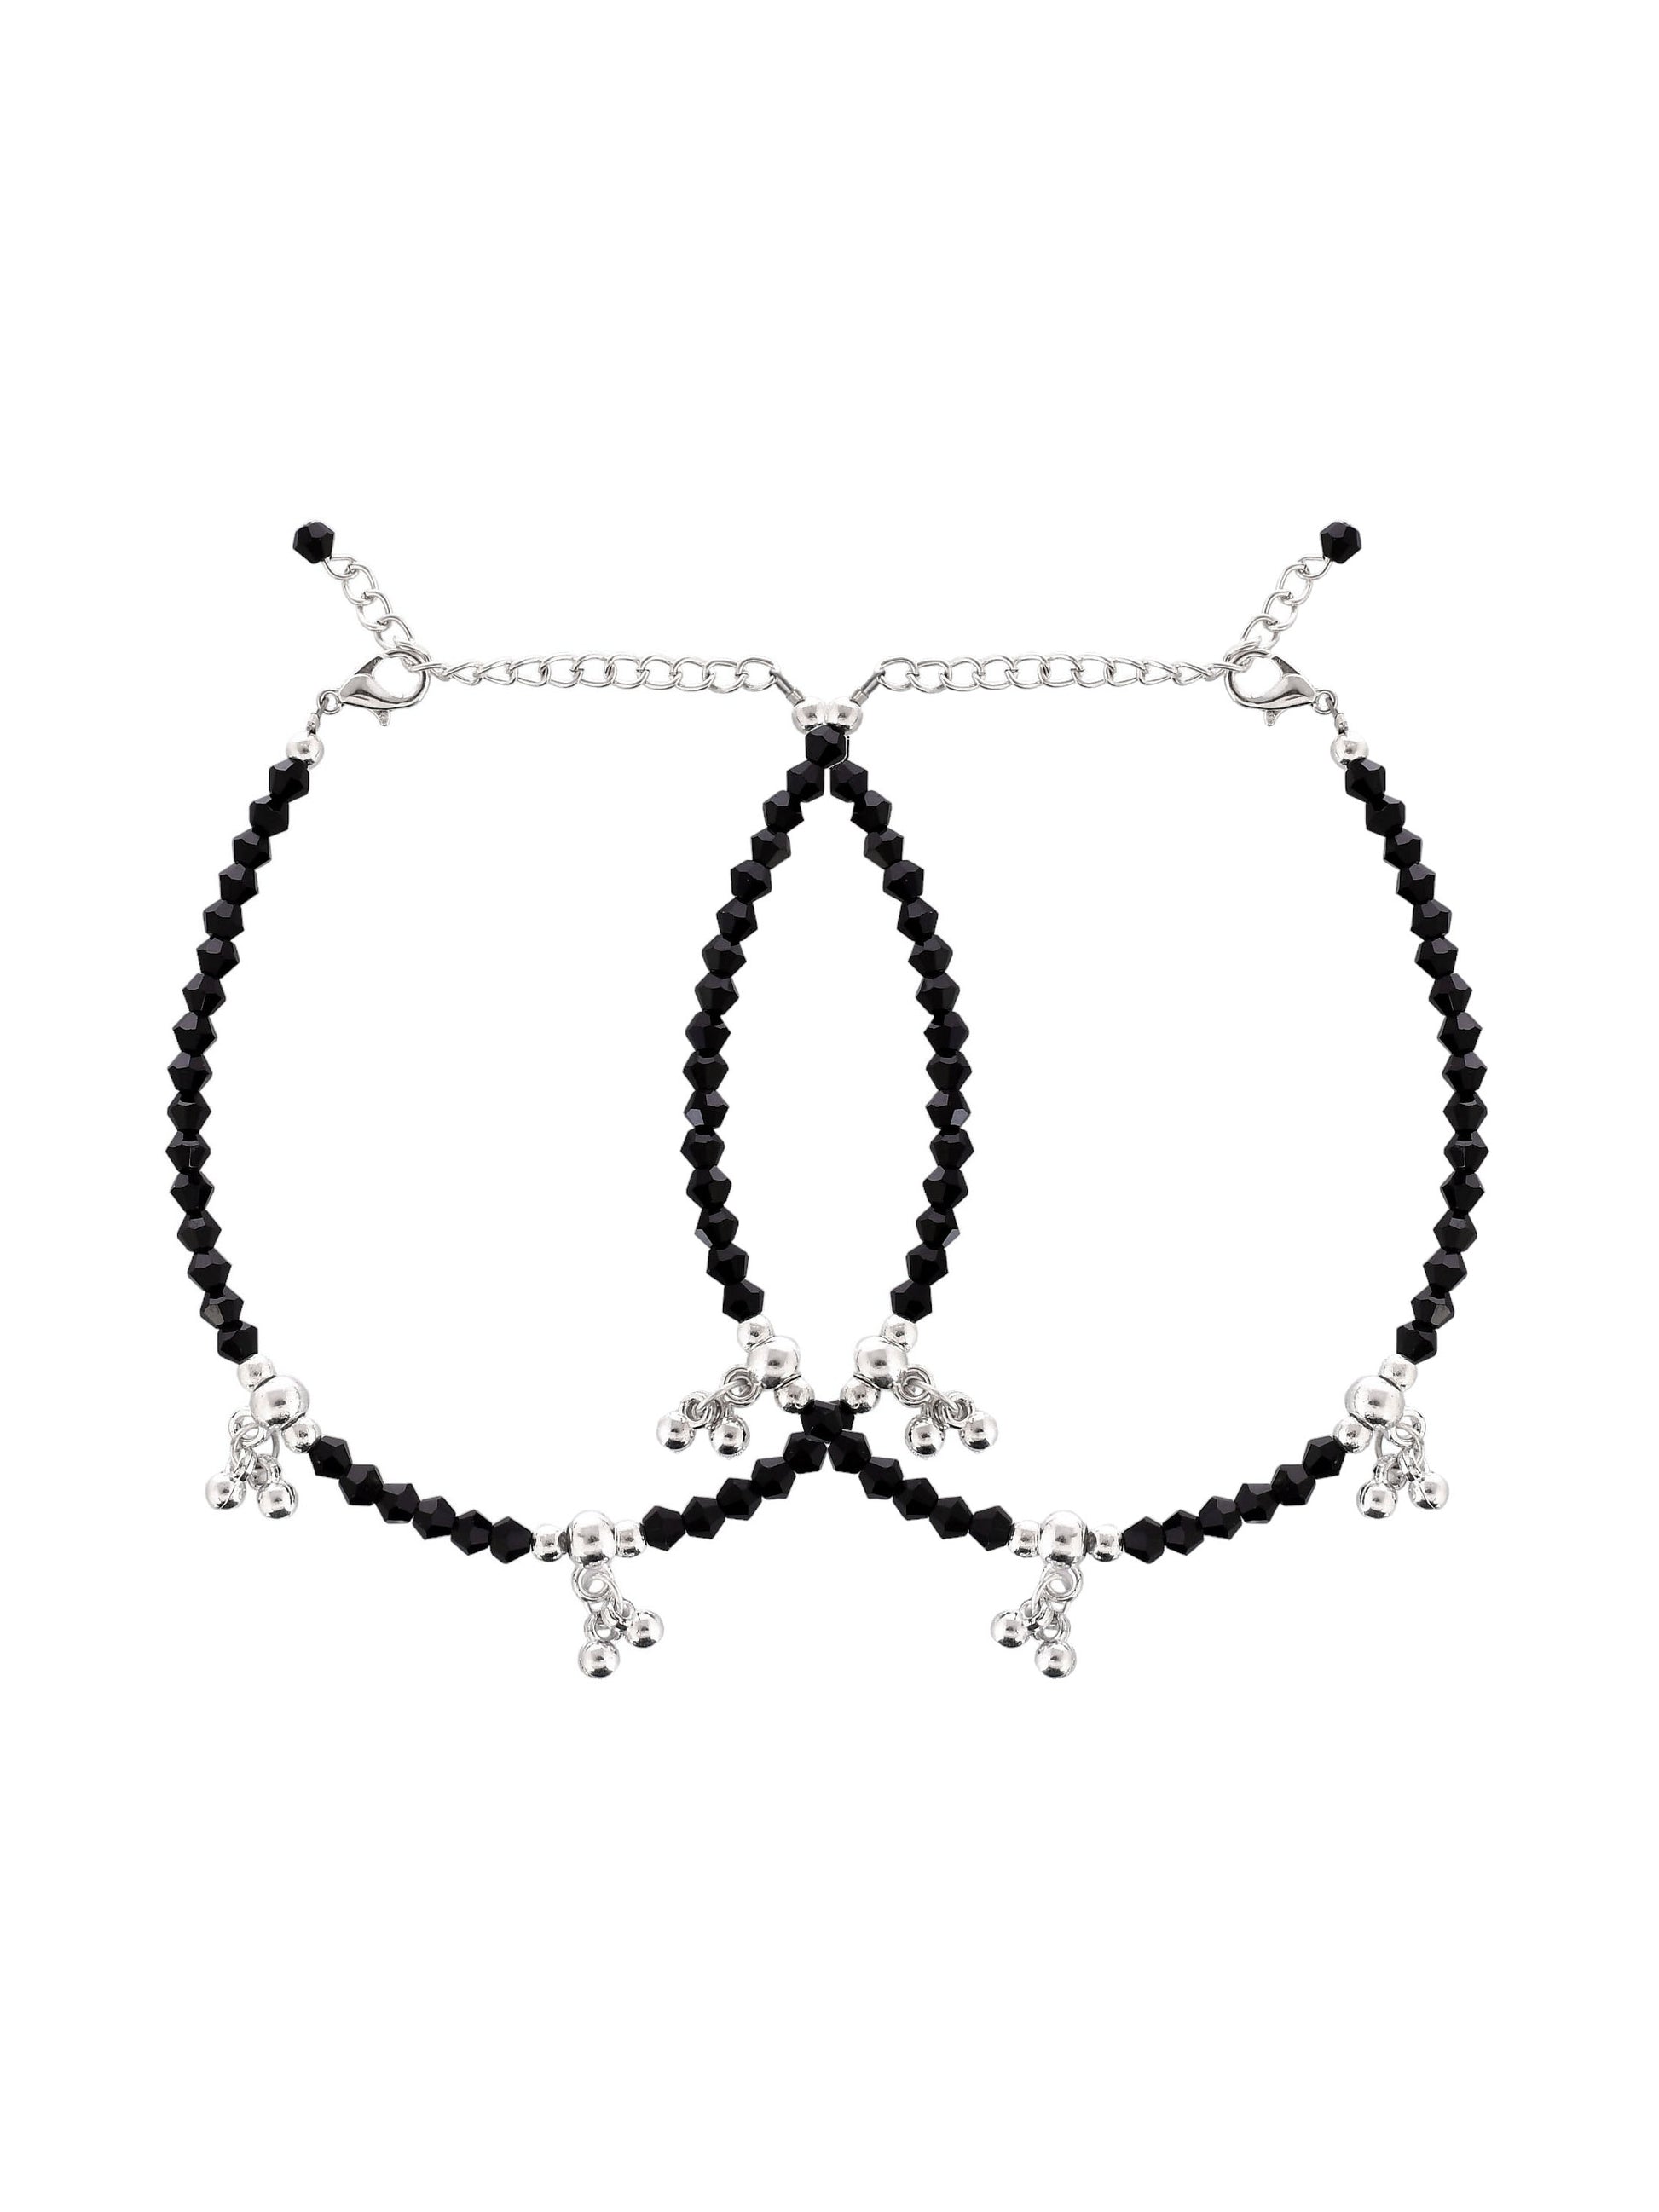 silver pearls Studded Black beads chain anklet for womens